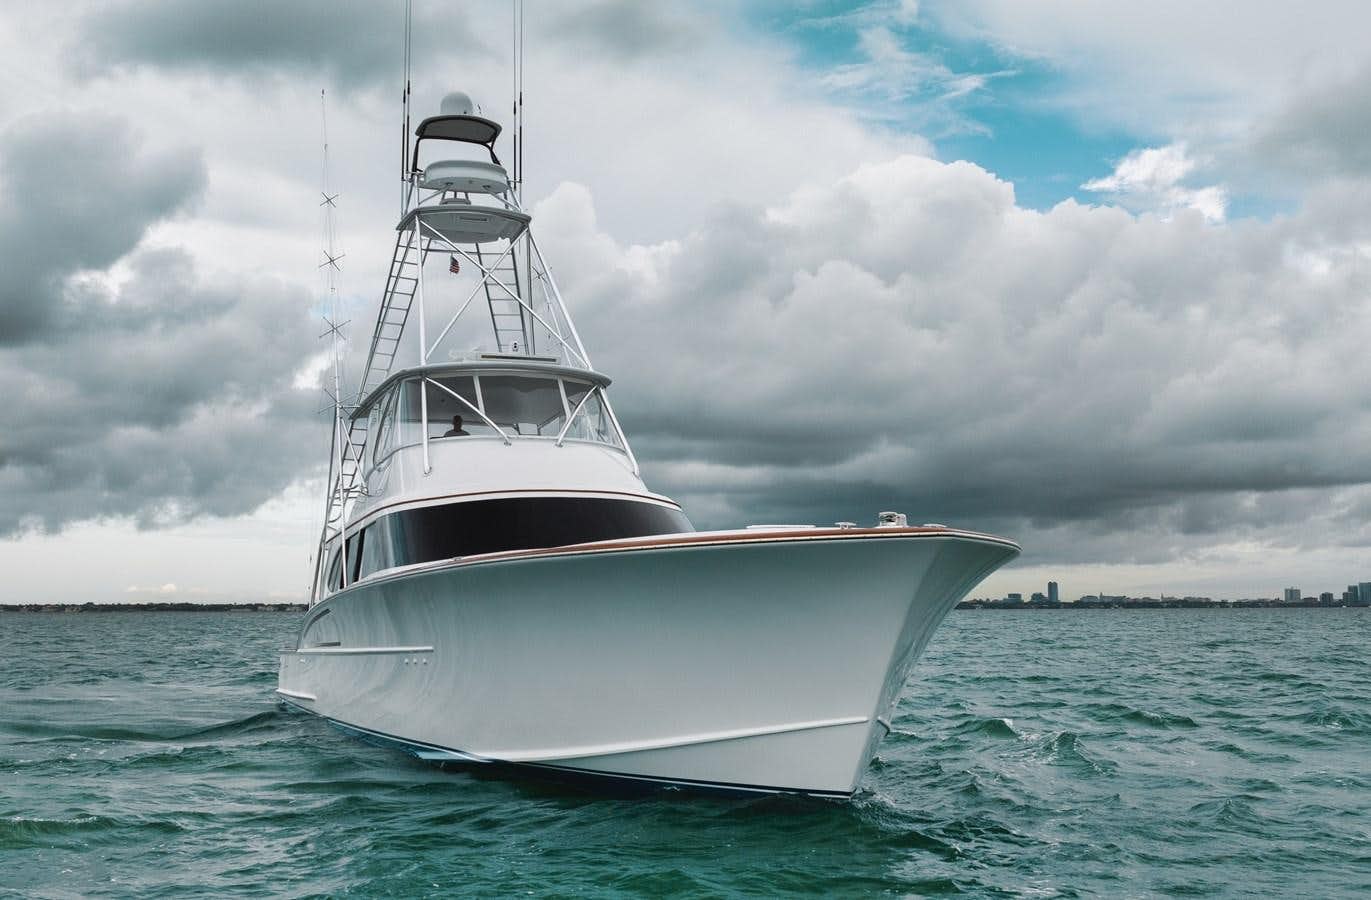 Paul Mann builds 76-foot sportfishing boat - Trade Only Today